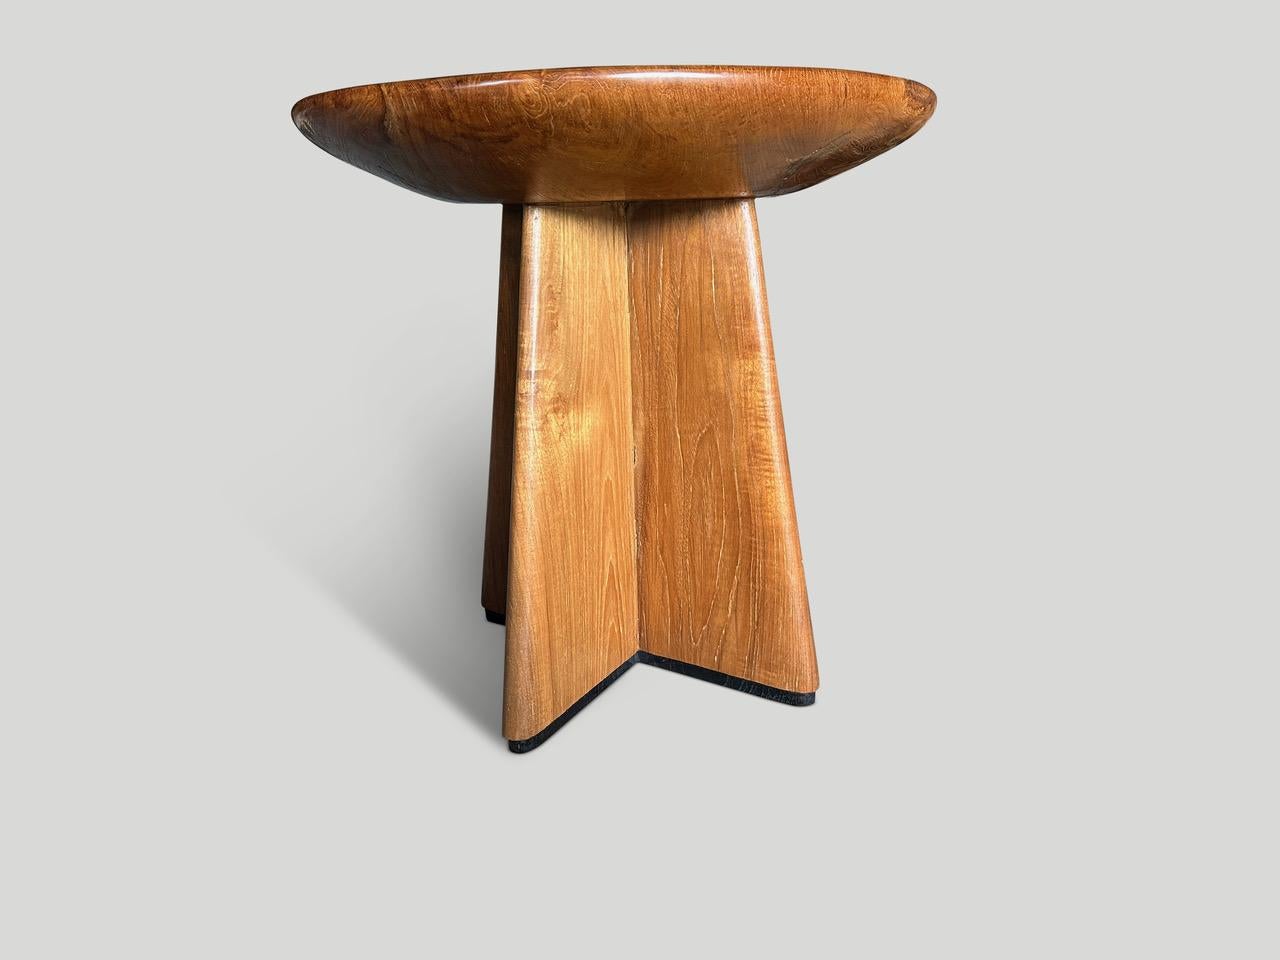 Magnificent 100 year old wood taken from my finest collection to produce this one of a kind large side table or entry table. The top has an impressive four inch bevel. We added butterflies inlaid into the wood and a recessed espresso finish on the